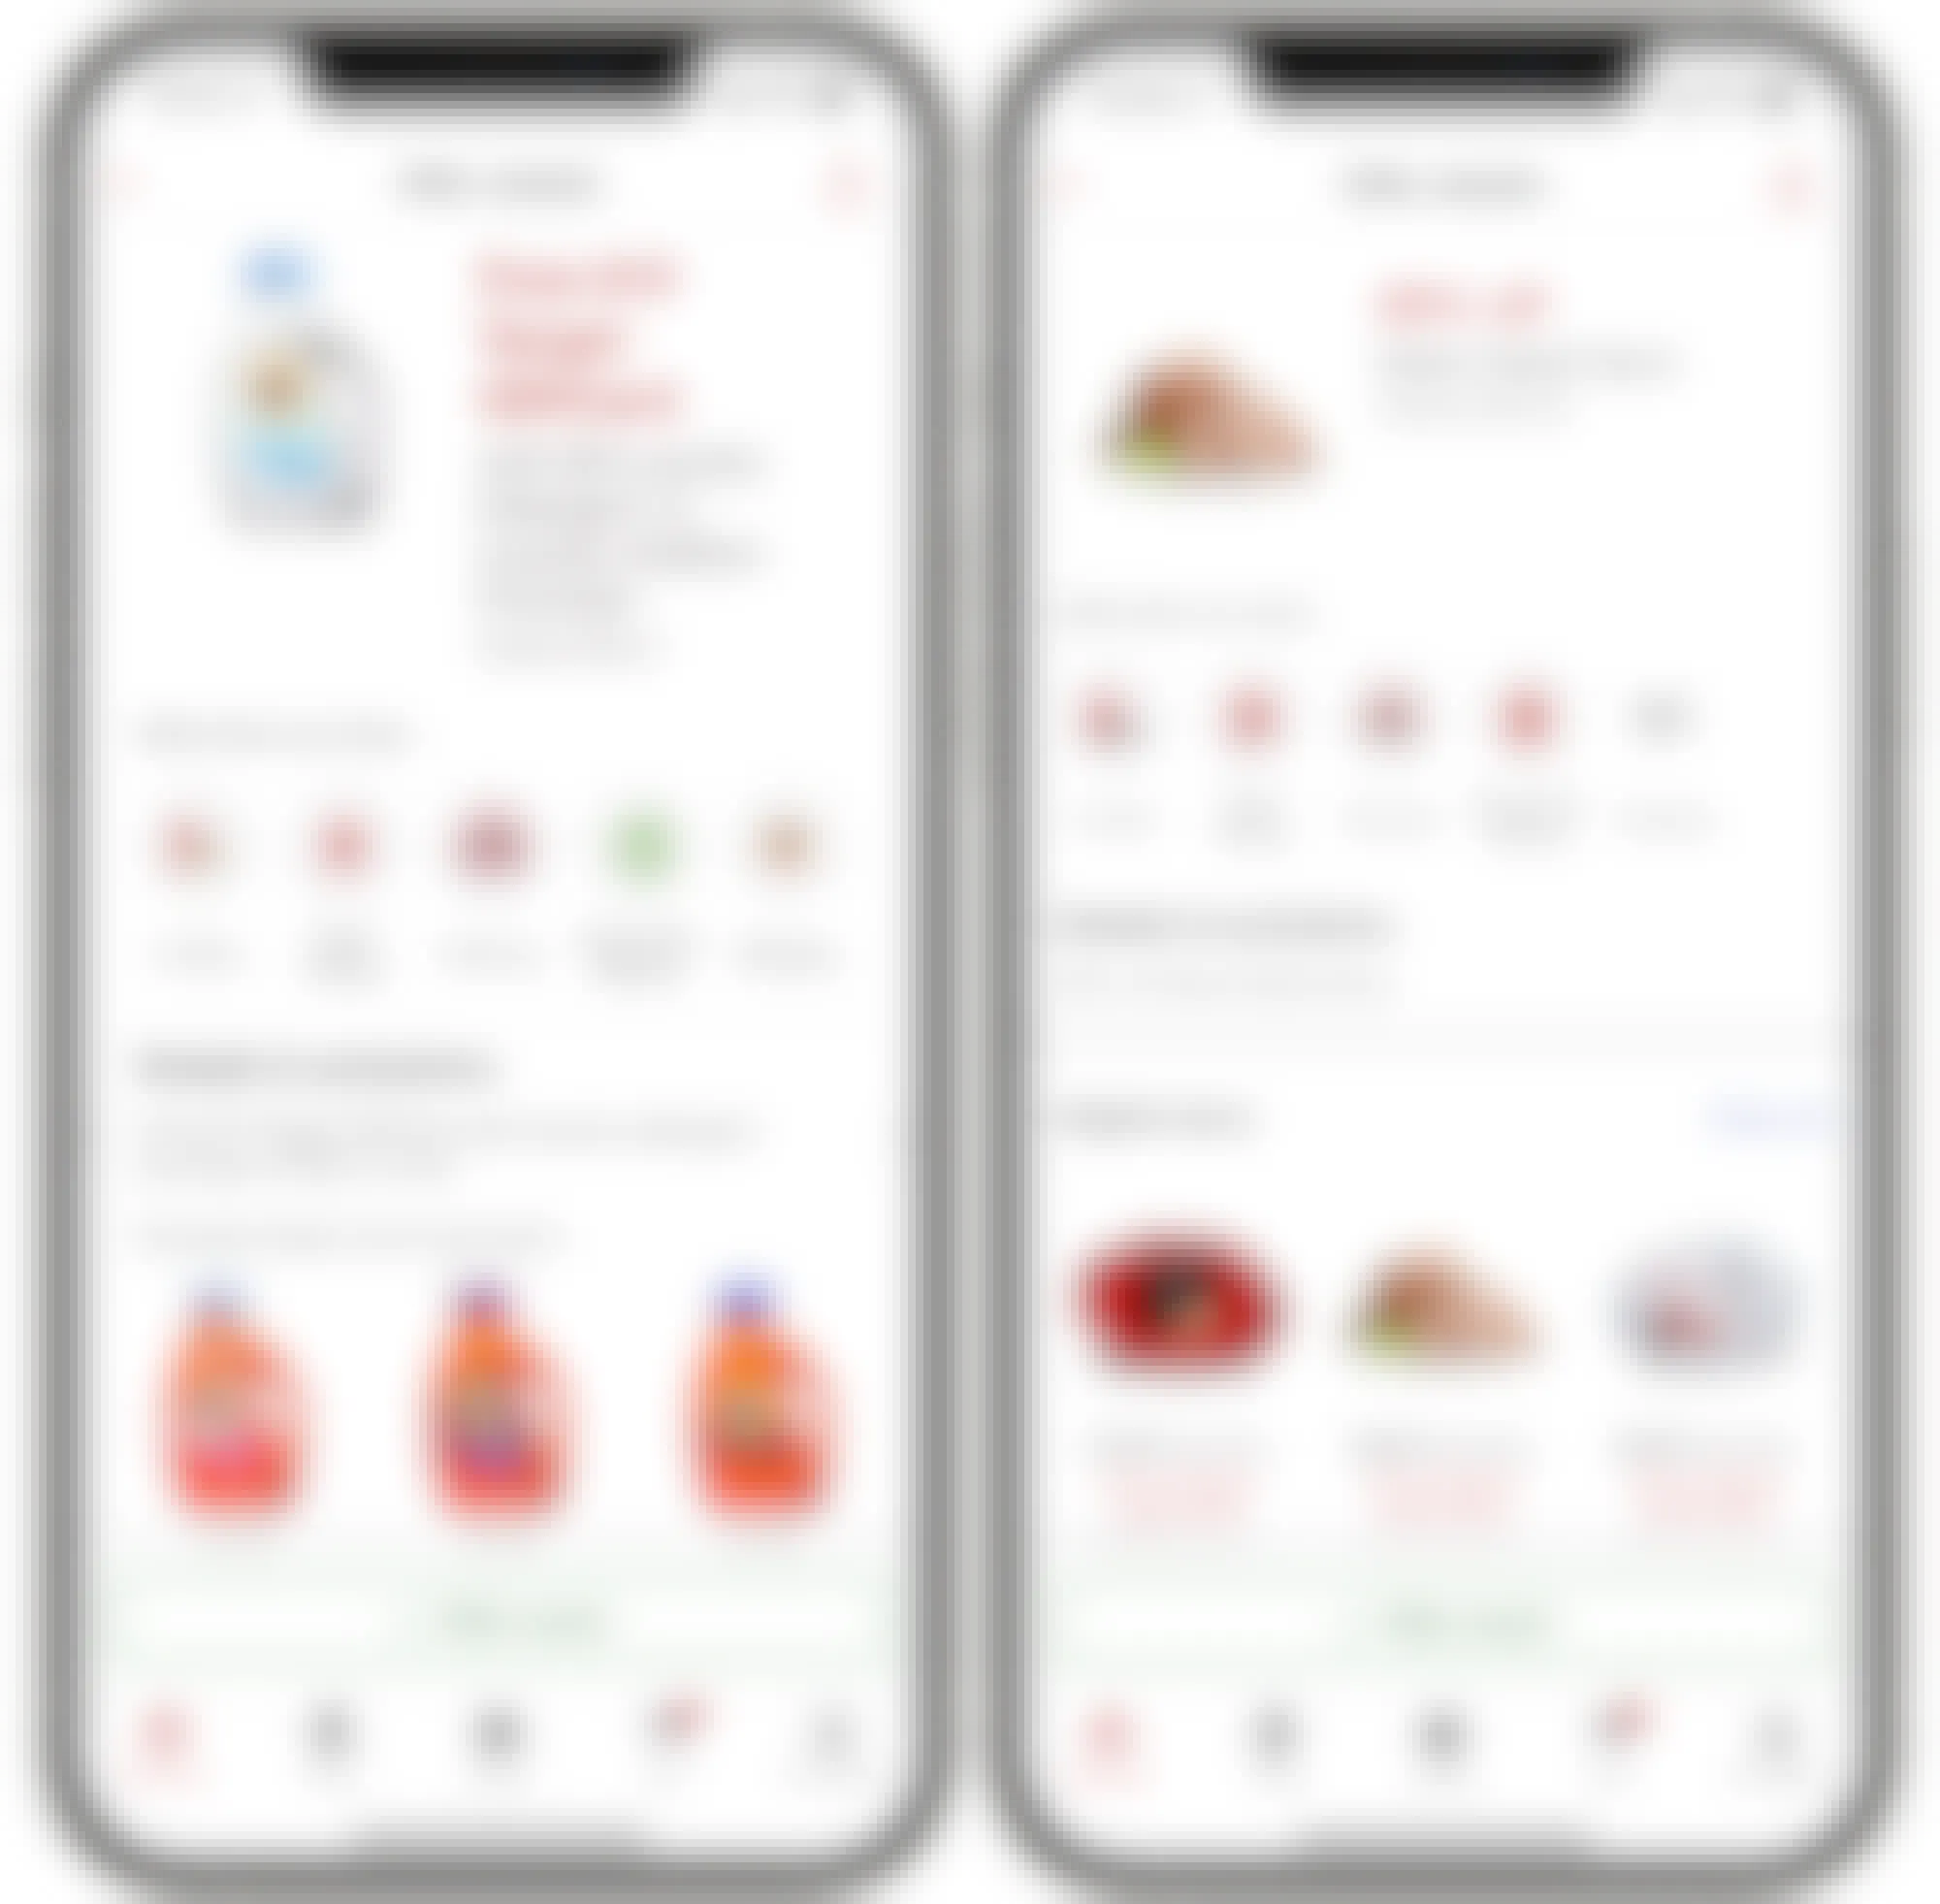 A graphic of two iPhones displaying two different Offers saved on the Target Circle app.